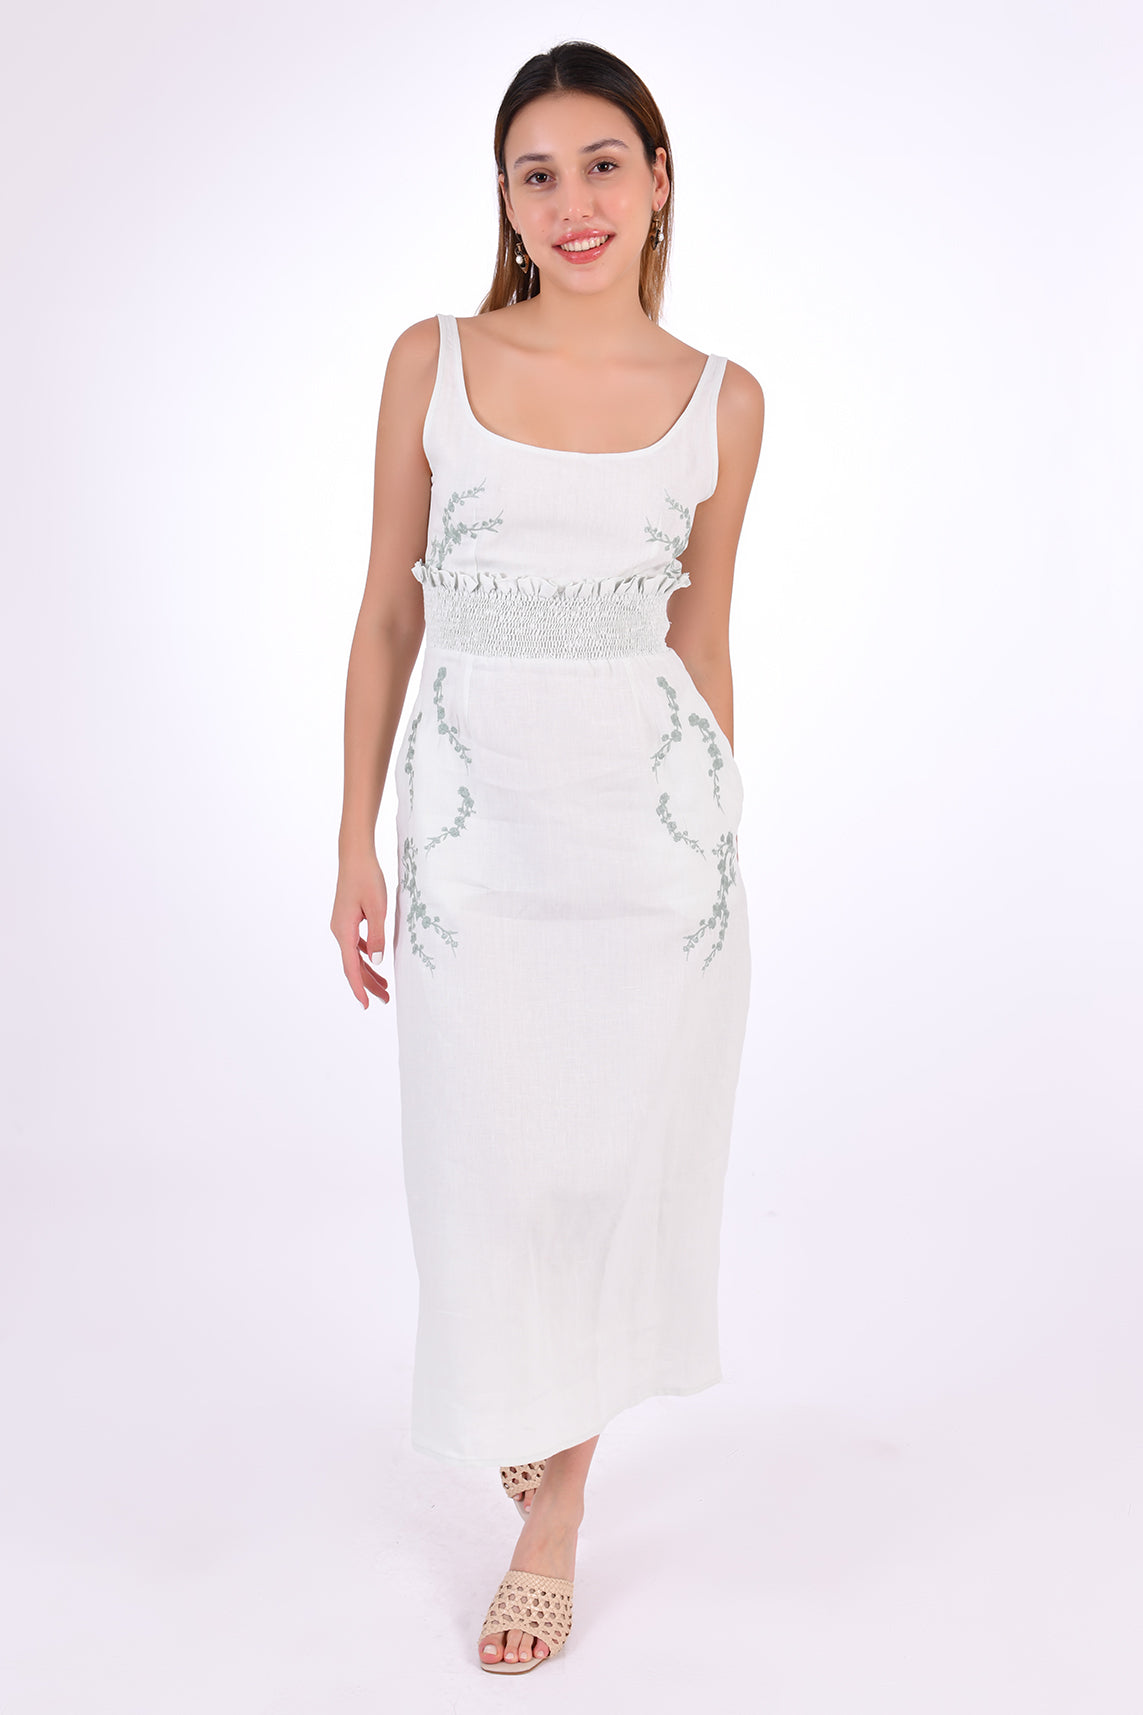 Fanm Mon BAHAR Midi Dress alternative front view. Sleeveless Midi Linen Sheath Dress. Featuring a smocked waistband with ruffle trim and hand-embroidered floral pattern.